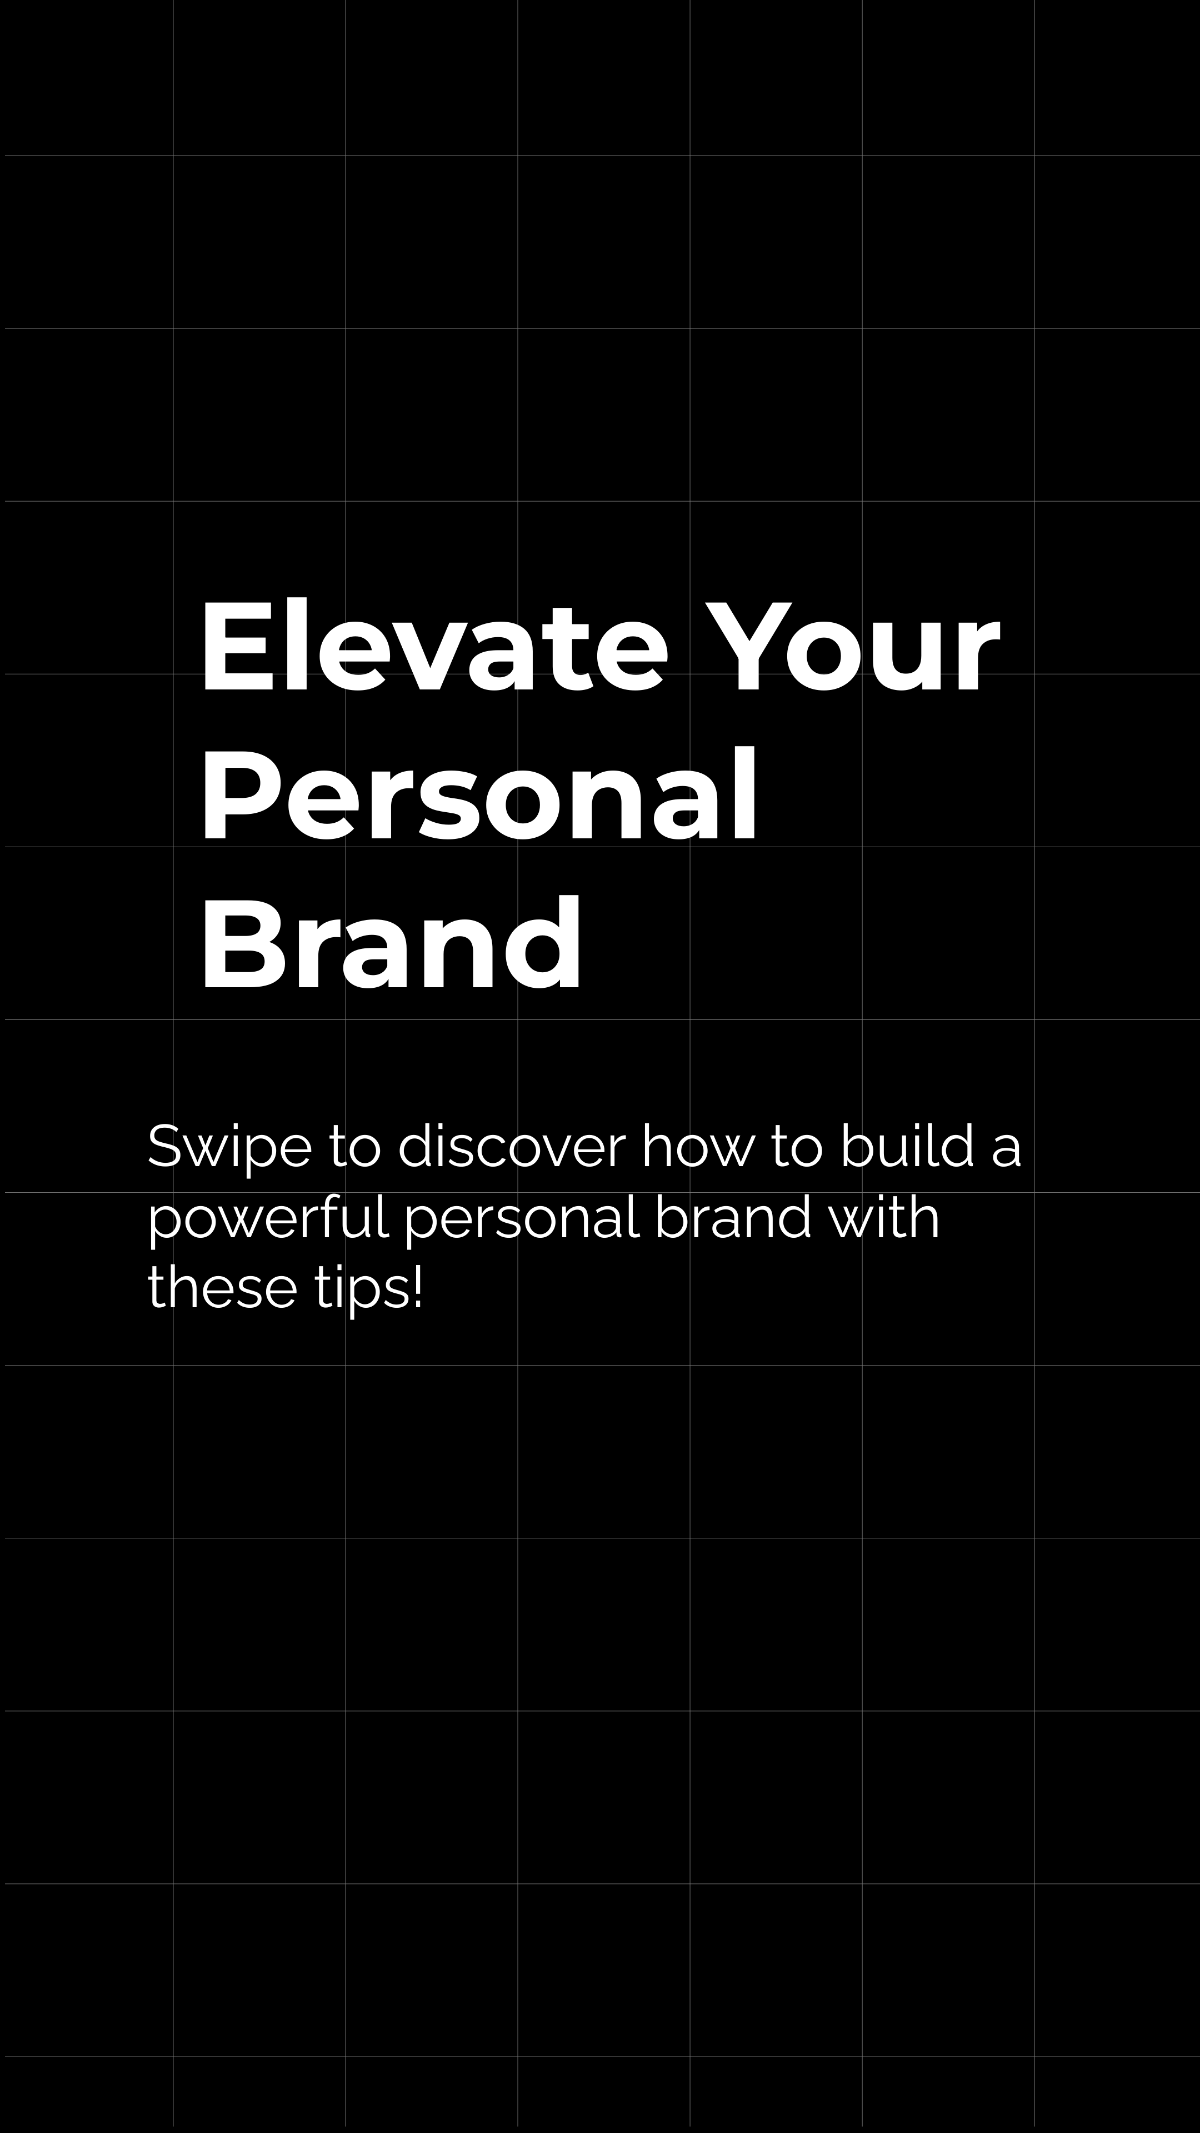 Personal Brand Carousel Tips Instagram Post Template